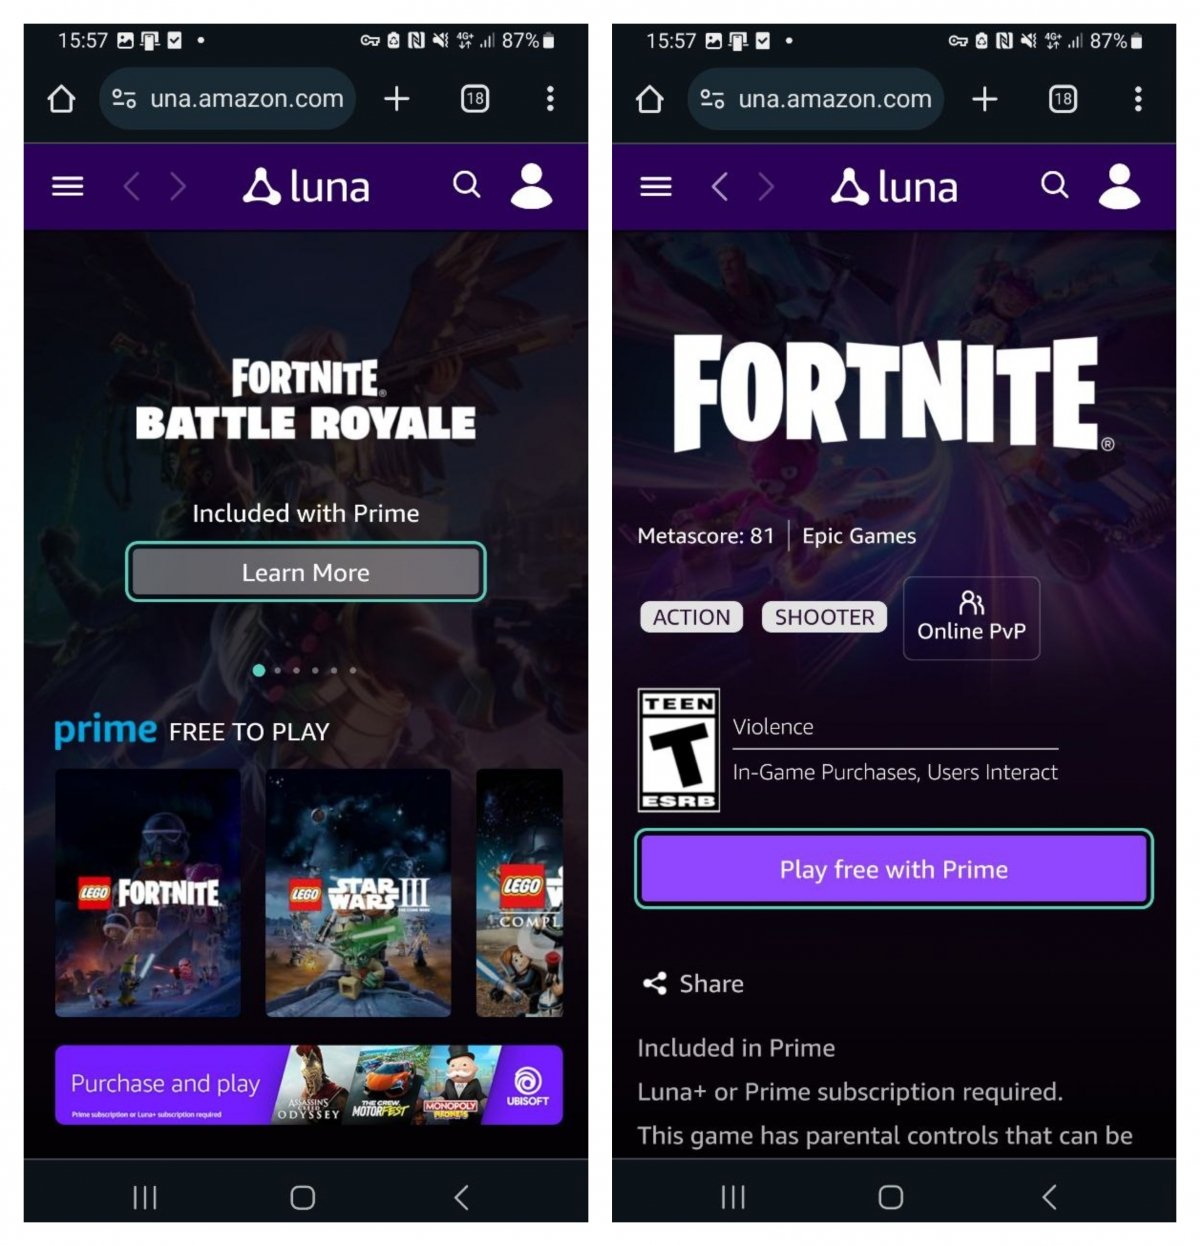 With Amazon Prime we can play Fortnite free on Luna